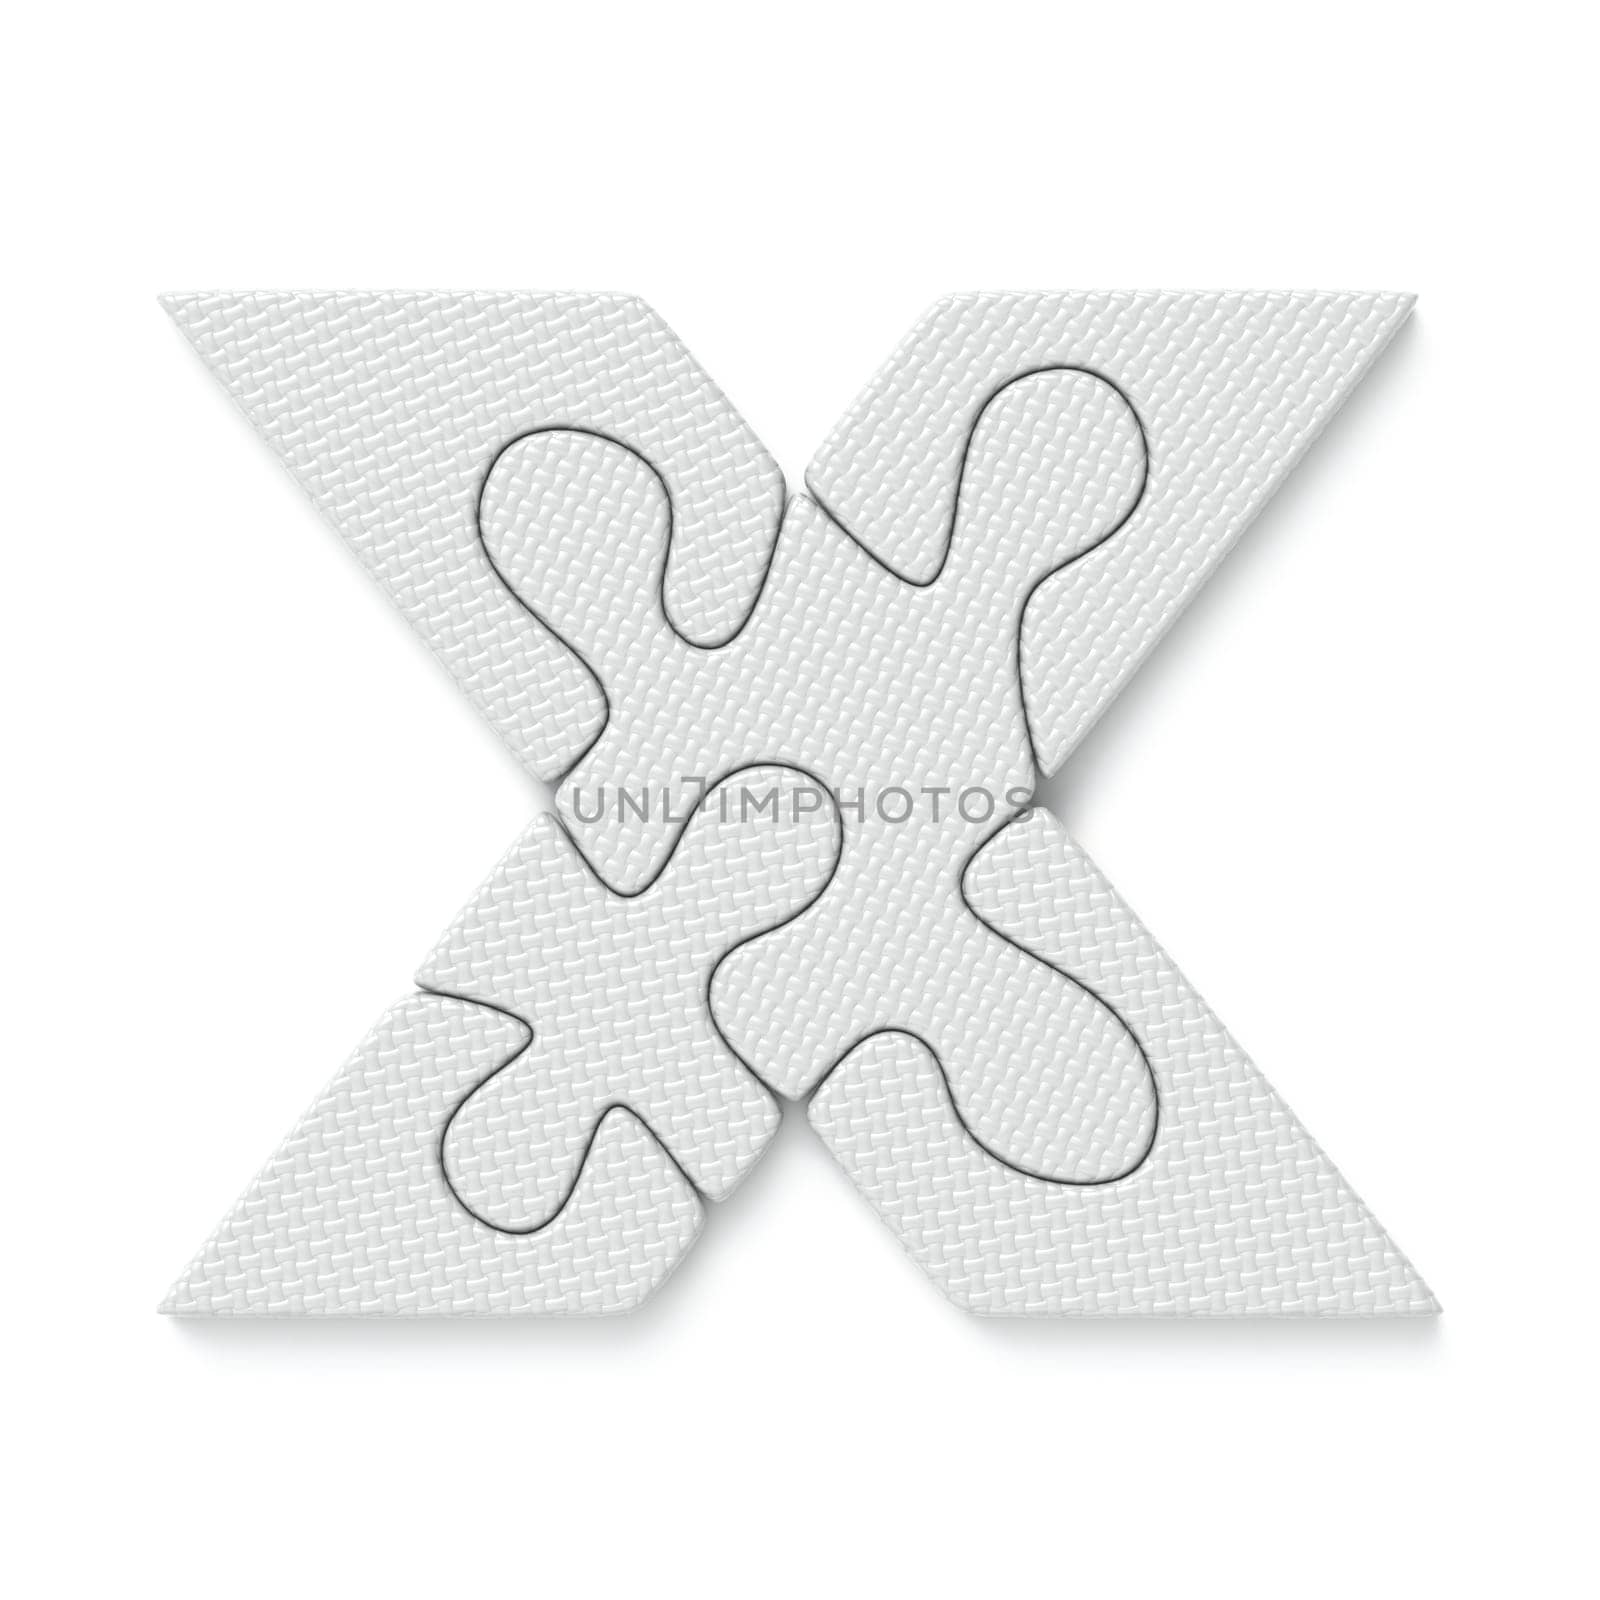 White jigsaw puzzle font Letter X  3D rendering illustration isolated on white background